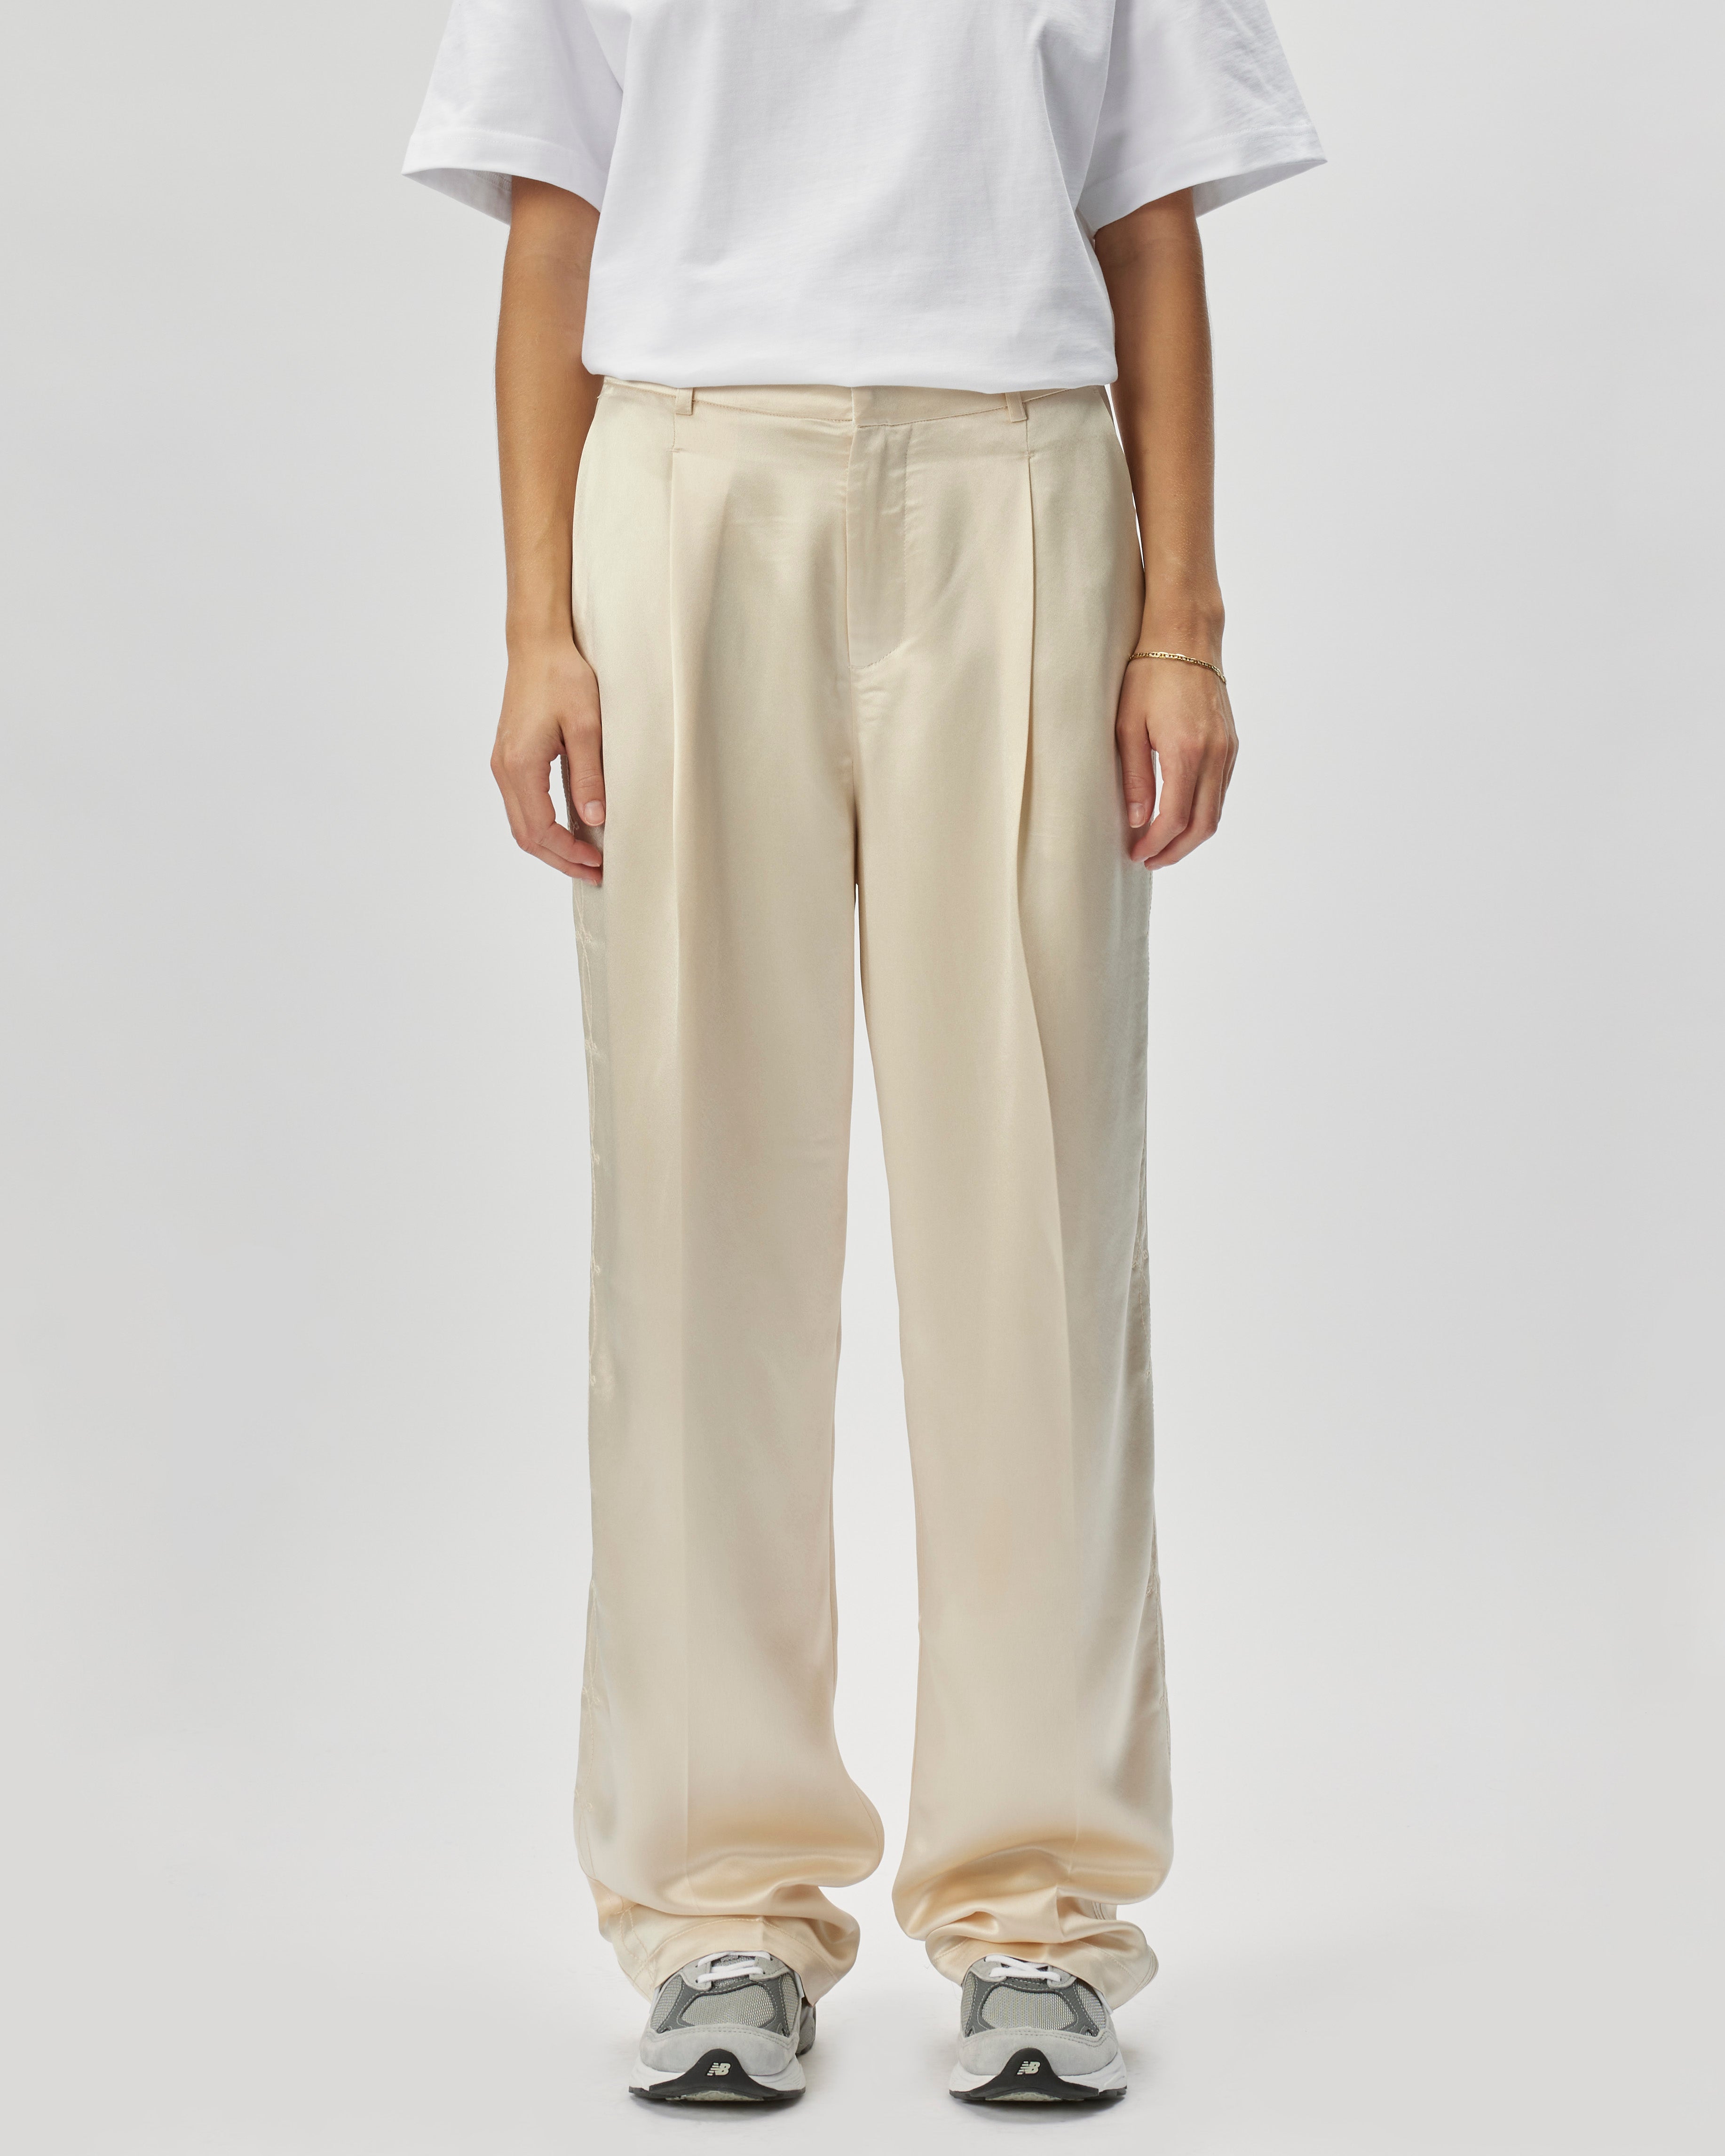 Soulland Ula Embroided Pant Off White 32051-1225